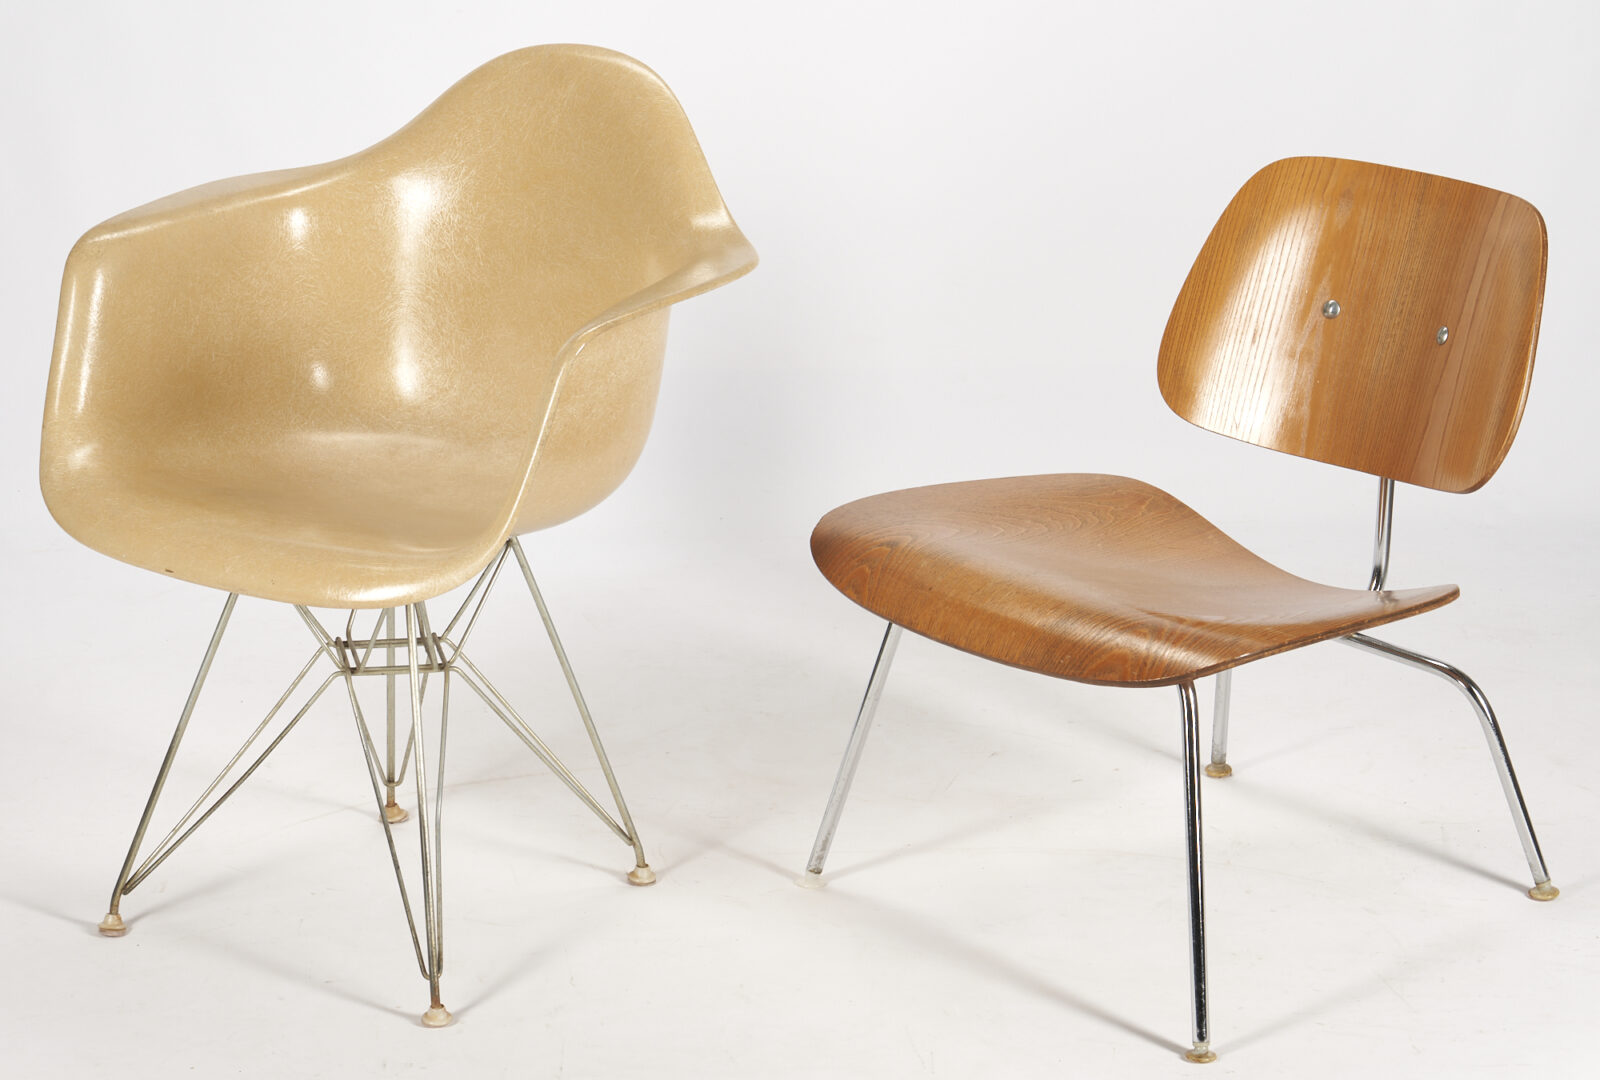 Lot 472: 2 Eames Mid-Century Chairs, Eiffel Fiberglass Shell & Molded Lounge Chair